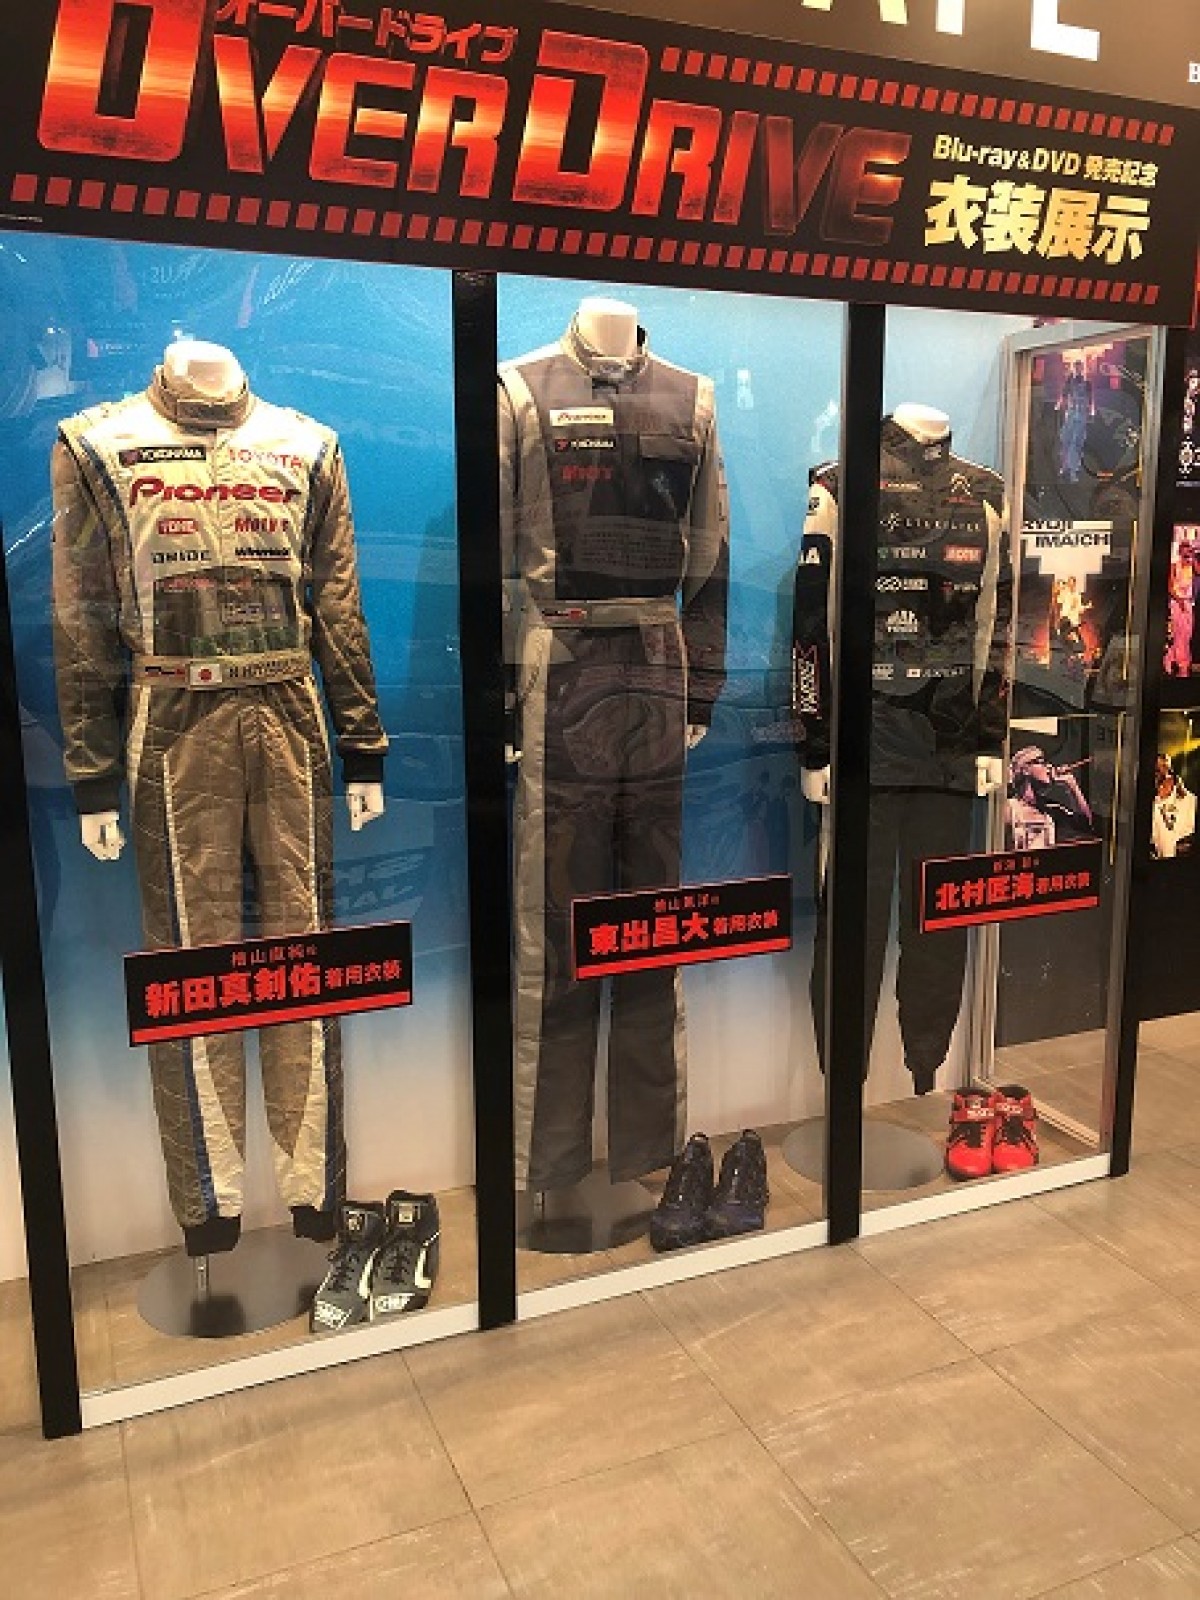 『OVER DRIVE』東出昌大、新田真剣佑、北村匠海が使用した衣装を期間限定展示！